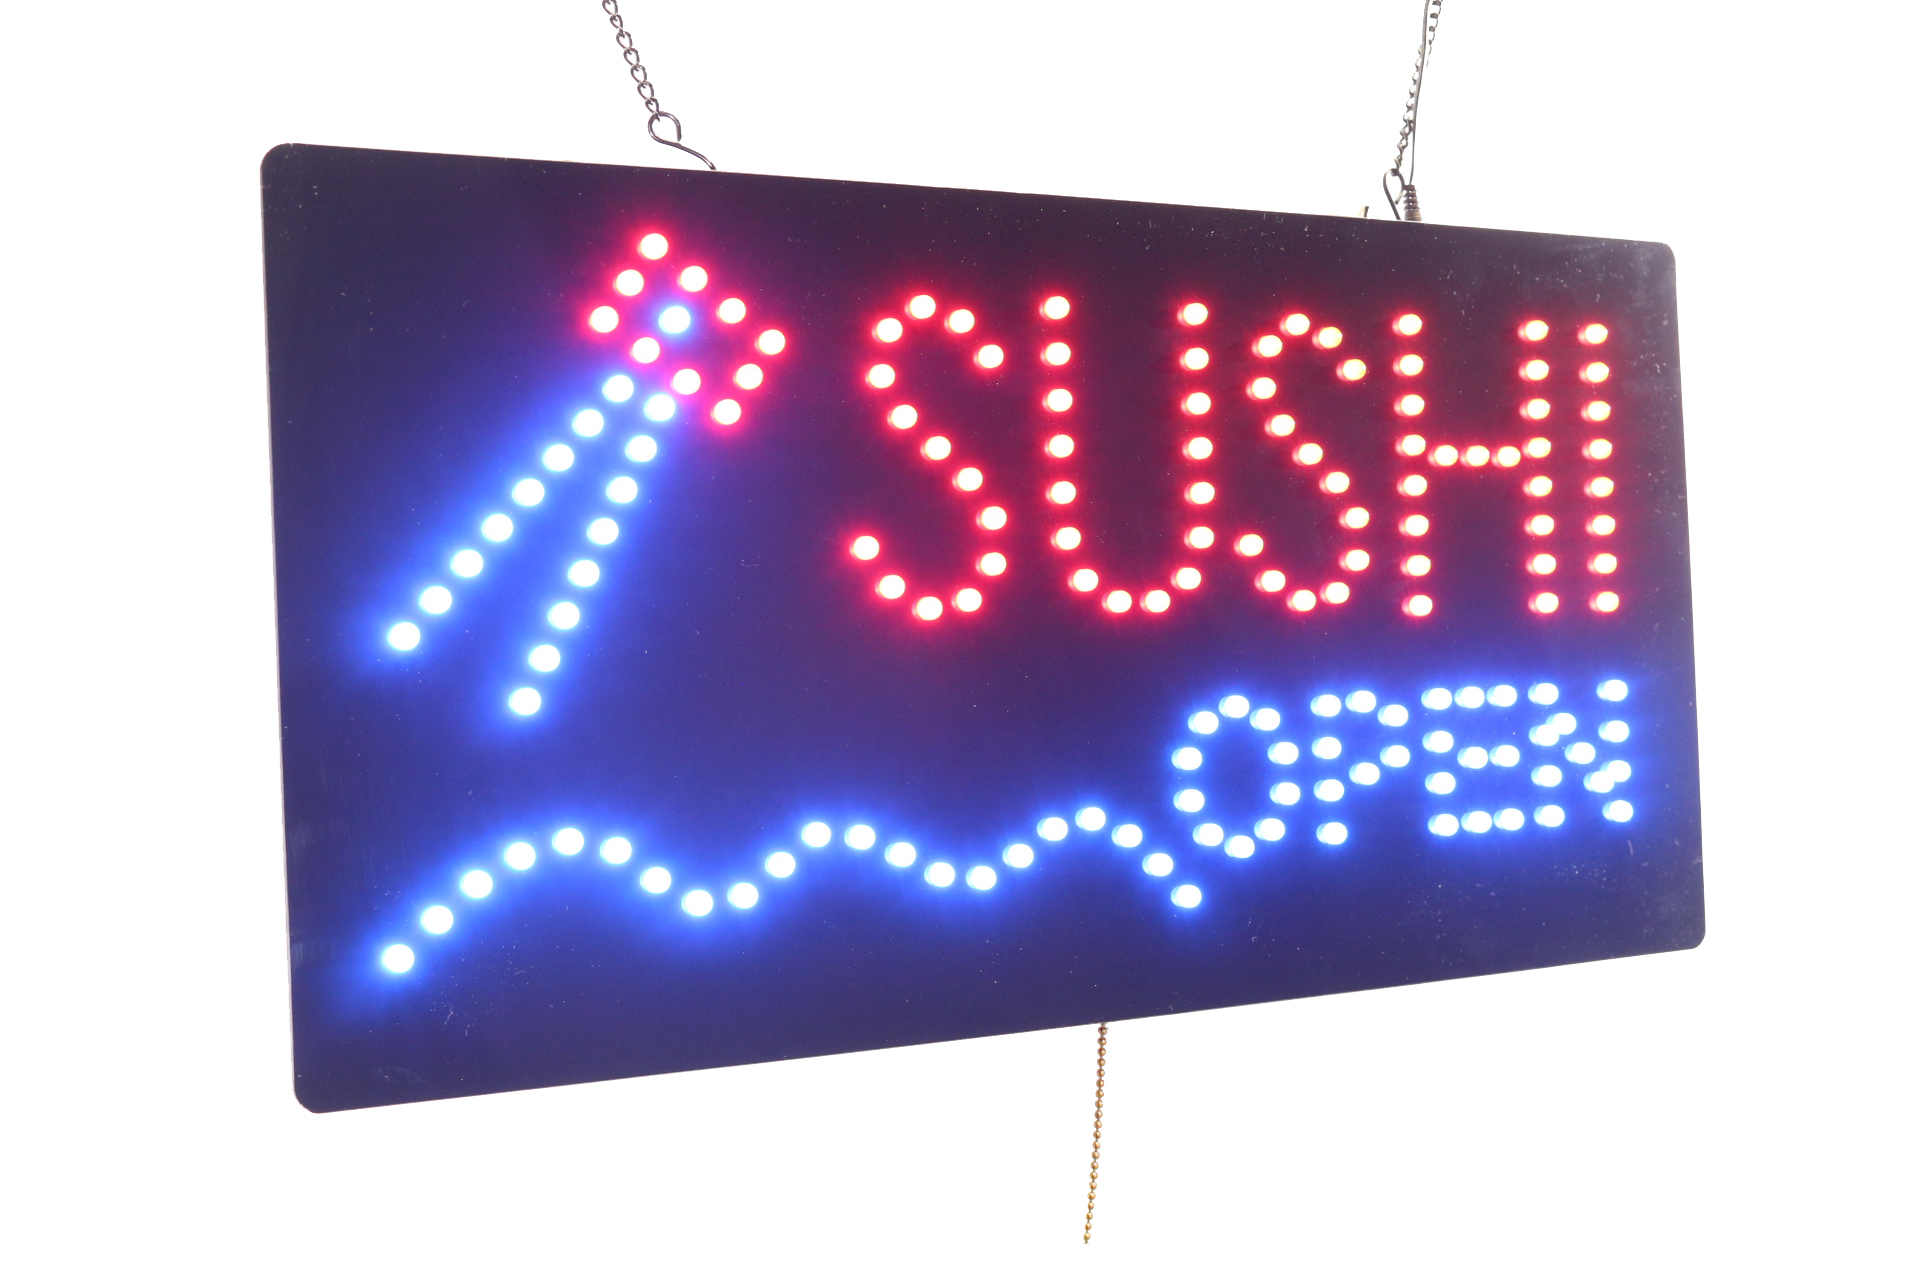 Sushi Open Sign, TOPKING Signage, LED Neon Open, Store, Window, Shop,  Business, Display, Grand Opening Gift